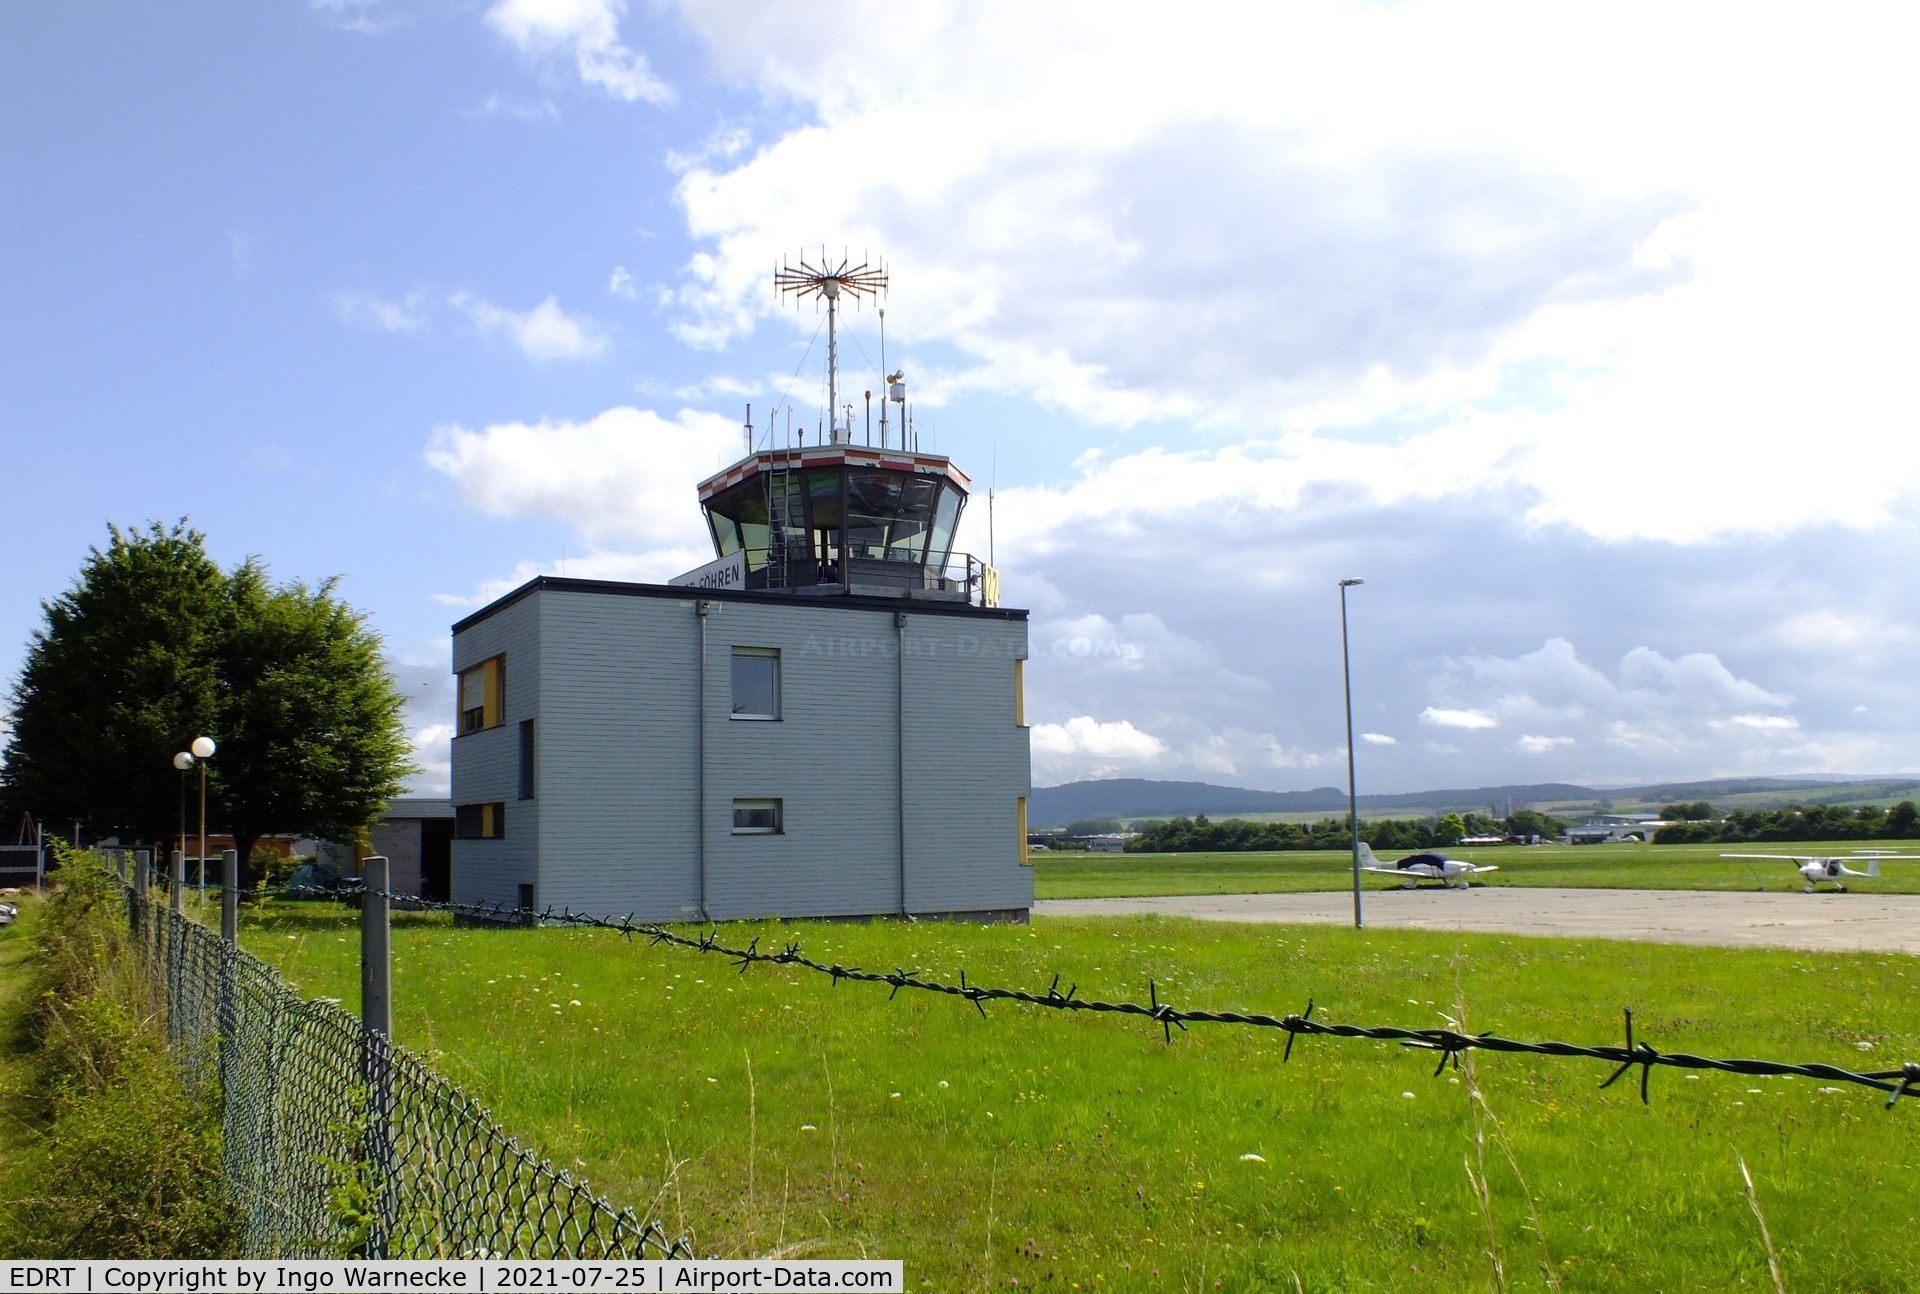 EDRT Airport - tower and apron at Trier-Föhren airfield